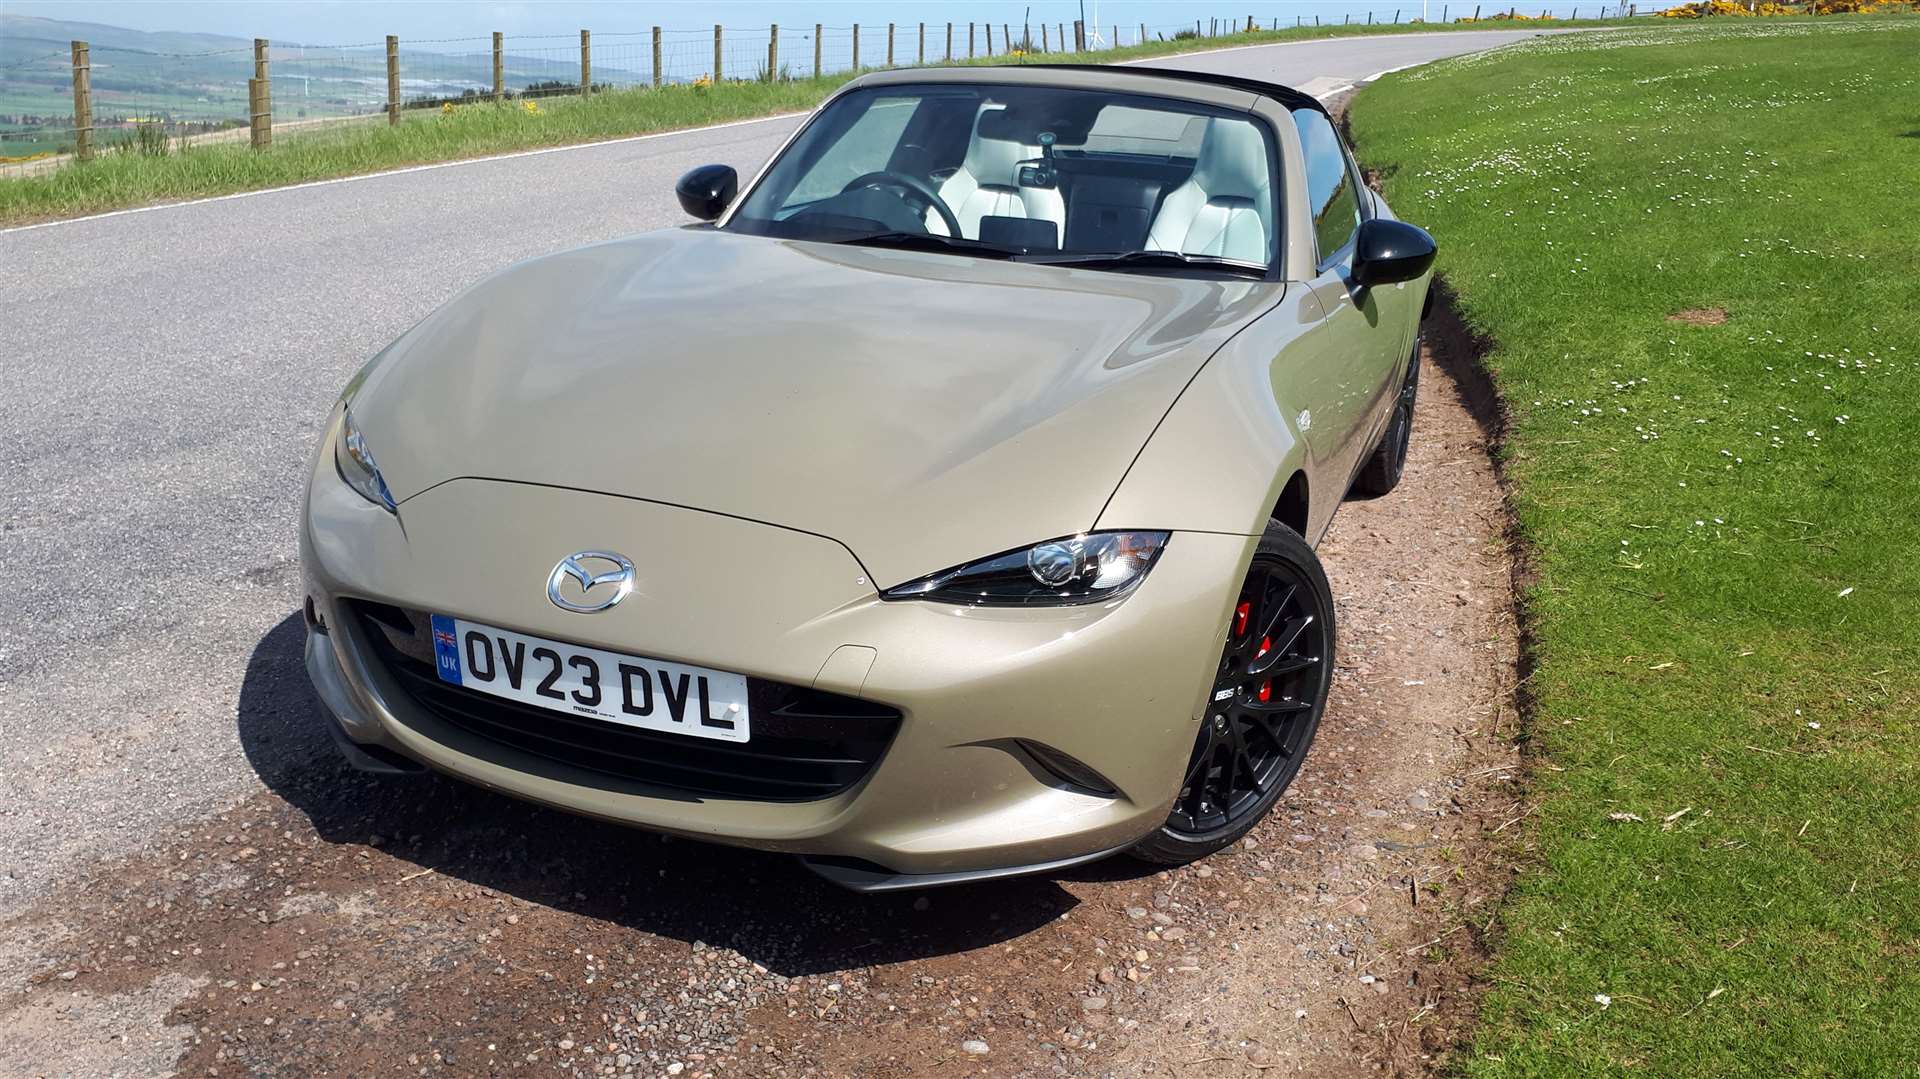 MOTORS: The driving experience brings new Mazda alive